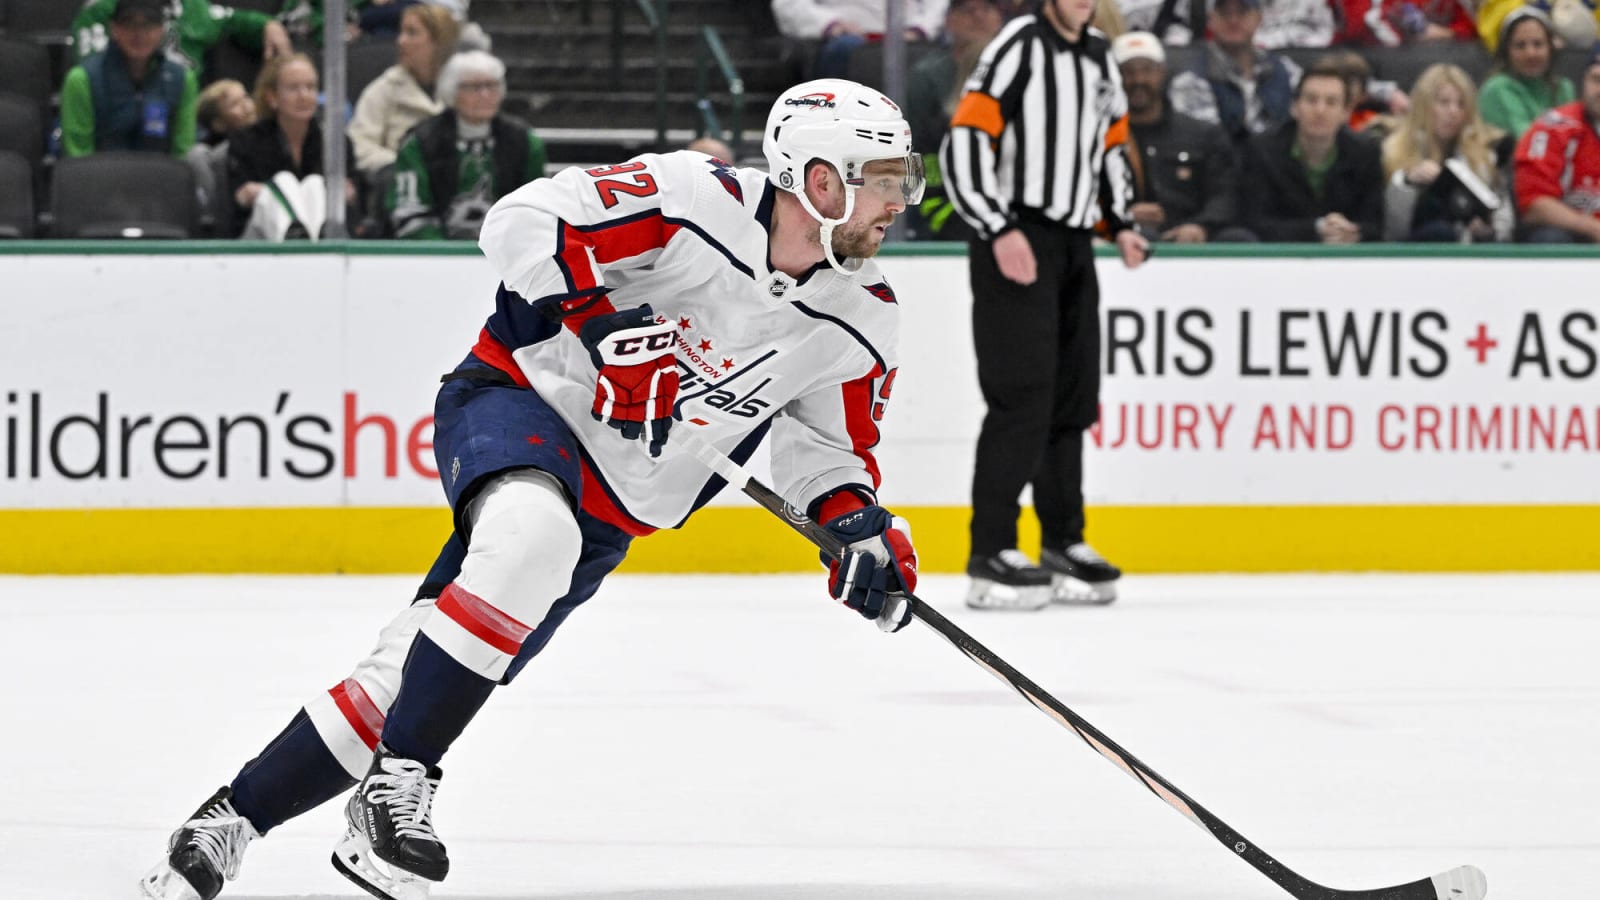 Evgeny Kuznetsov assigned to AHL after clearing waivers